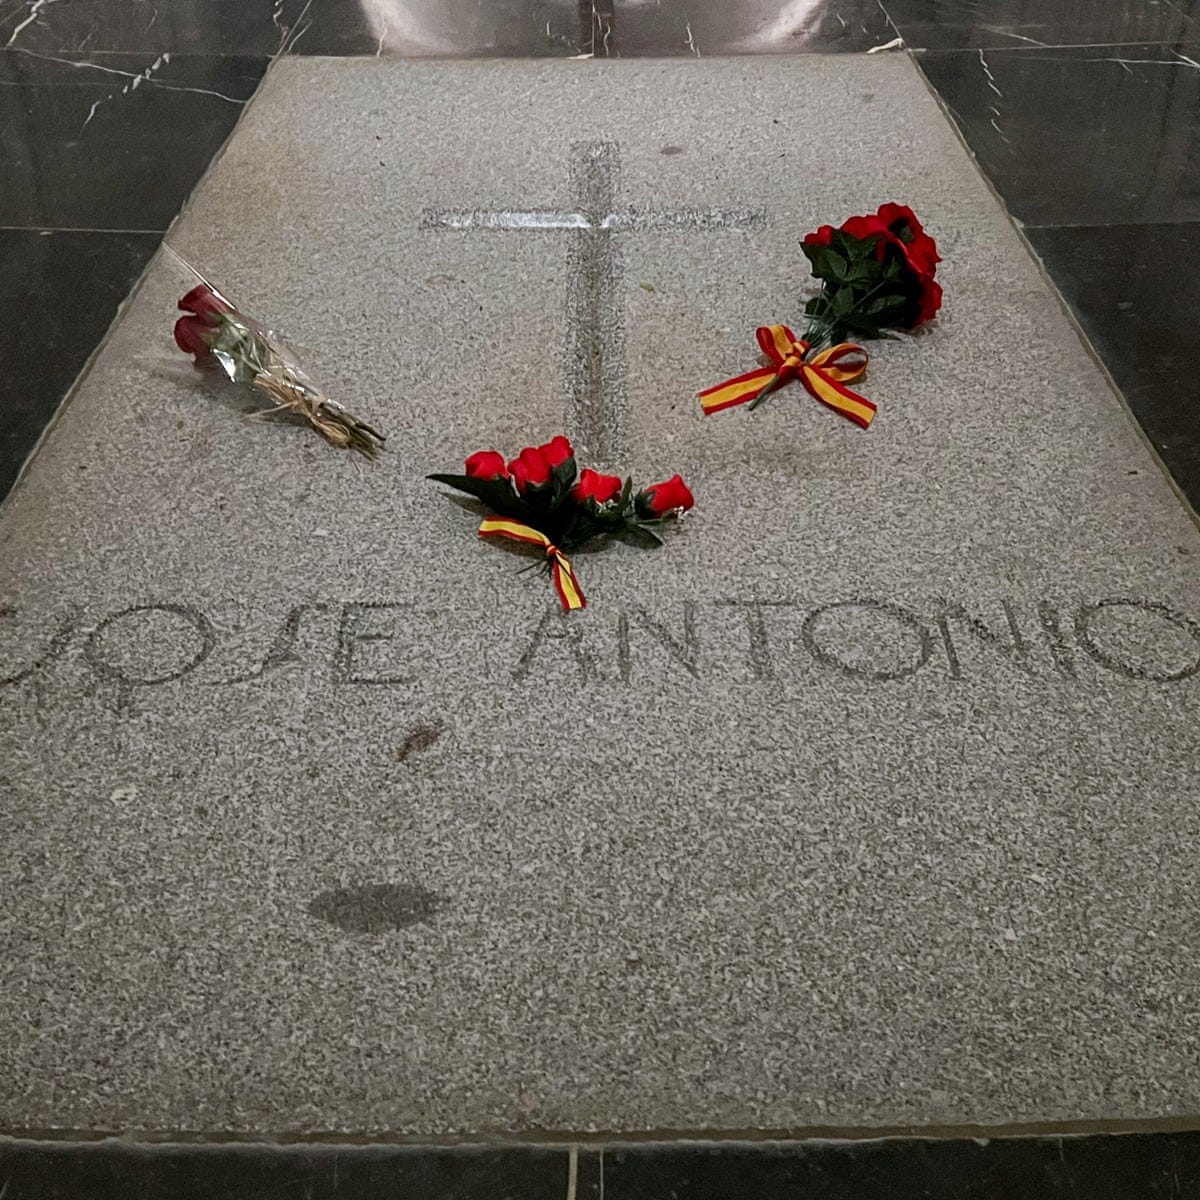 Body of Spain's fascist party founder to be removed from basilica | Spain |  The Guardian